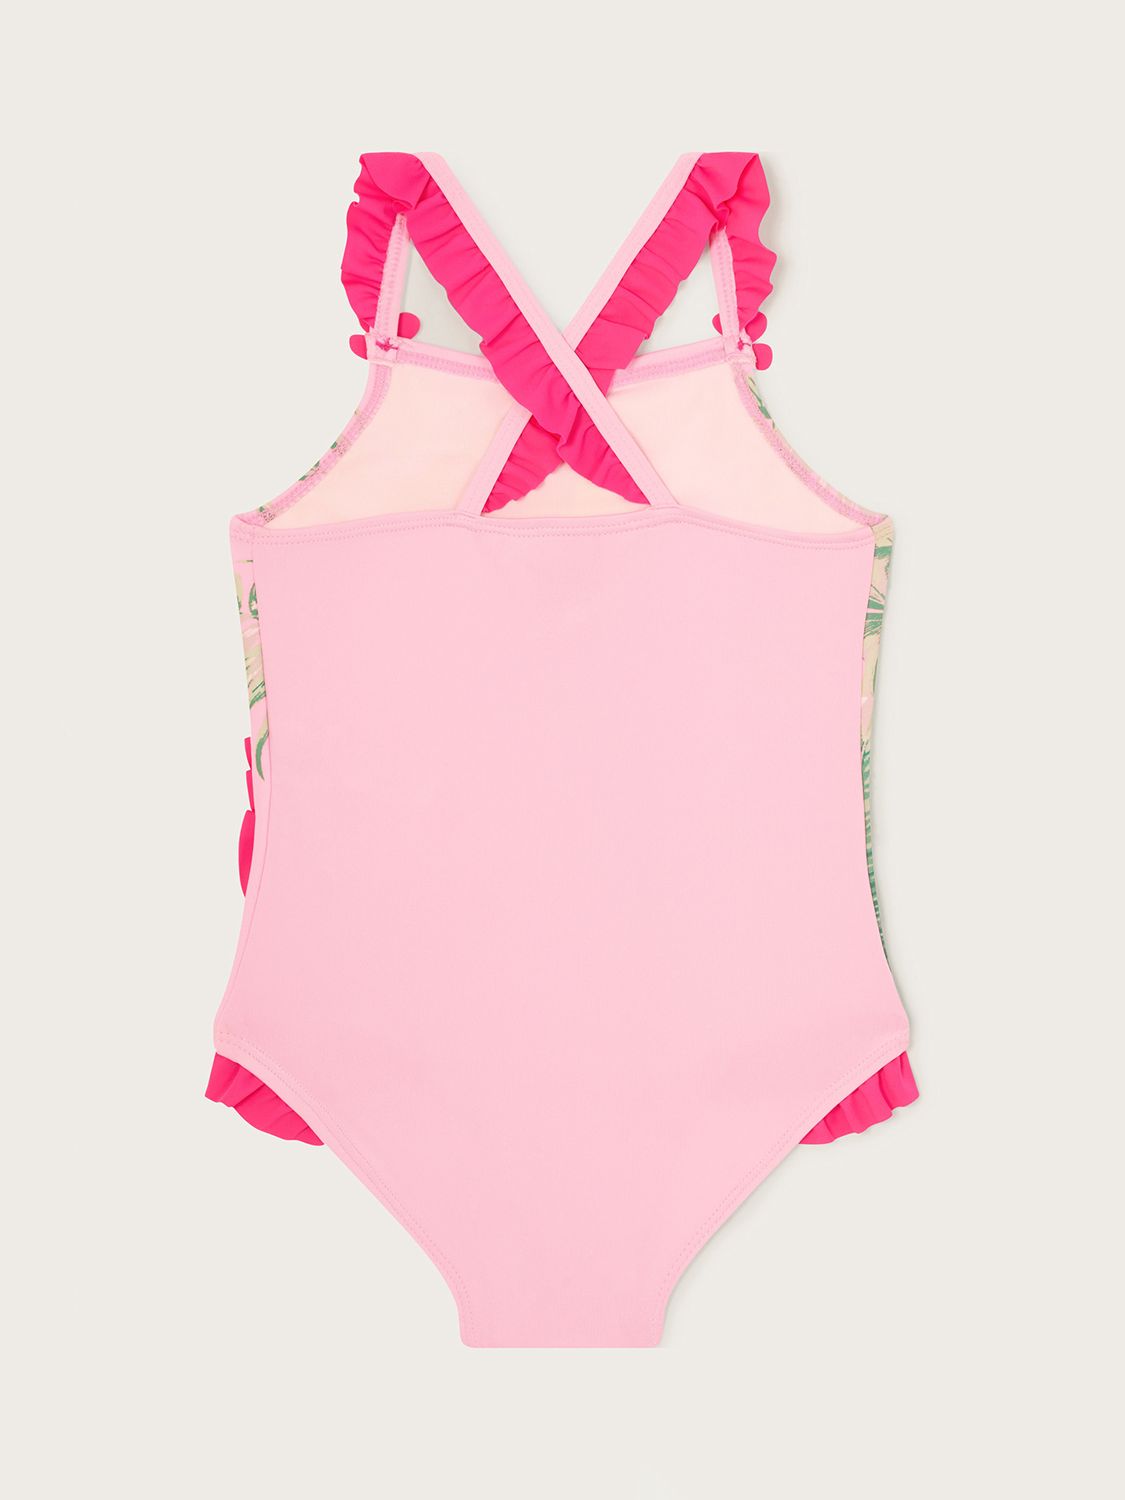 Monsoon Baby Flamingo Swimsuit, Pink, 0-3 months